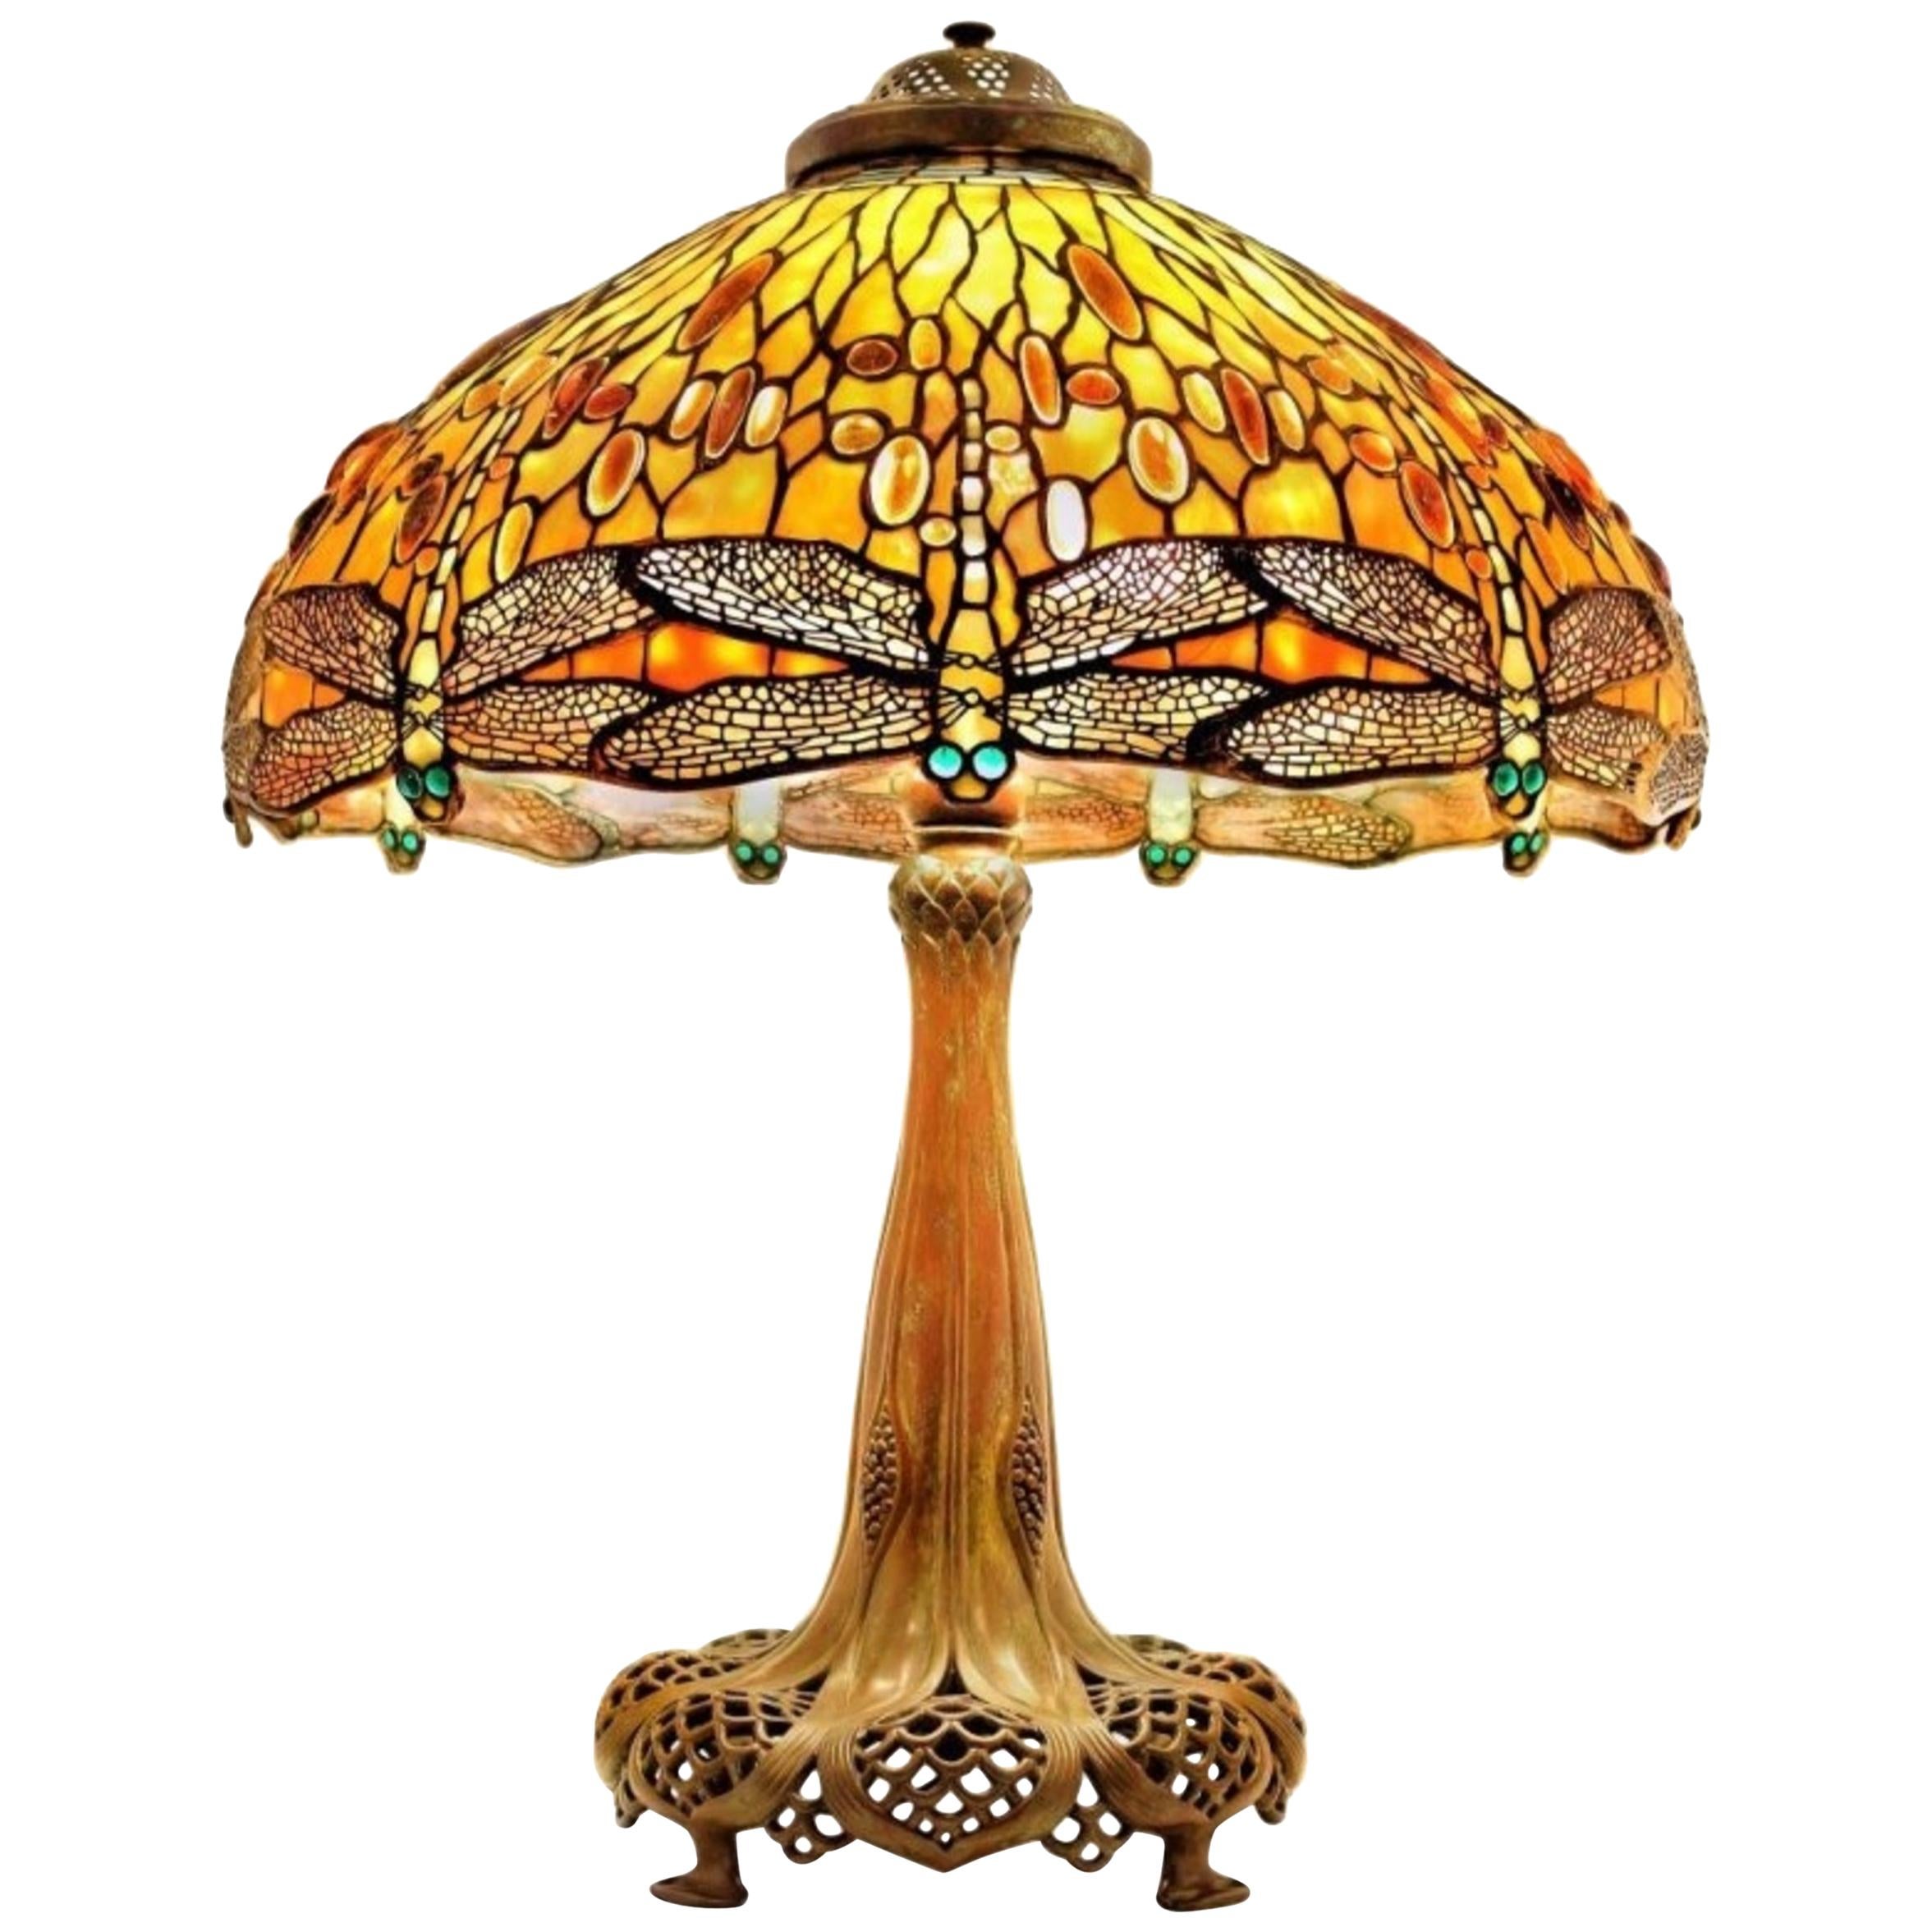 Jeweled Drop Head Dragonfly by Tiffany Studios, Stamped, circa 1910